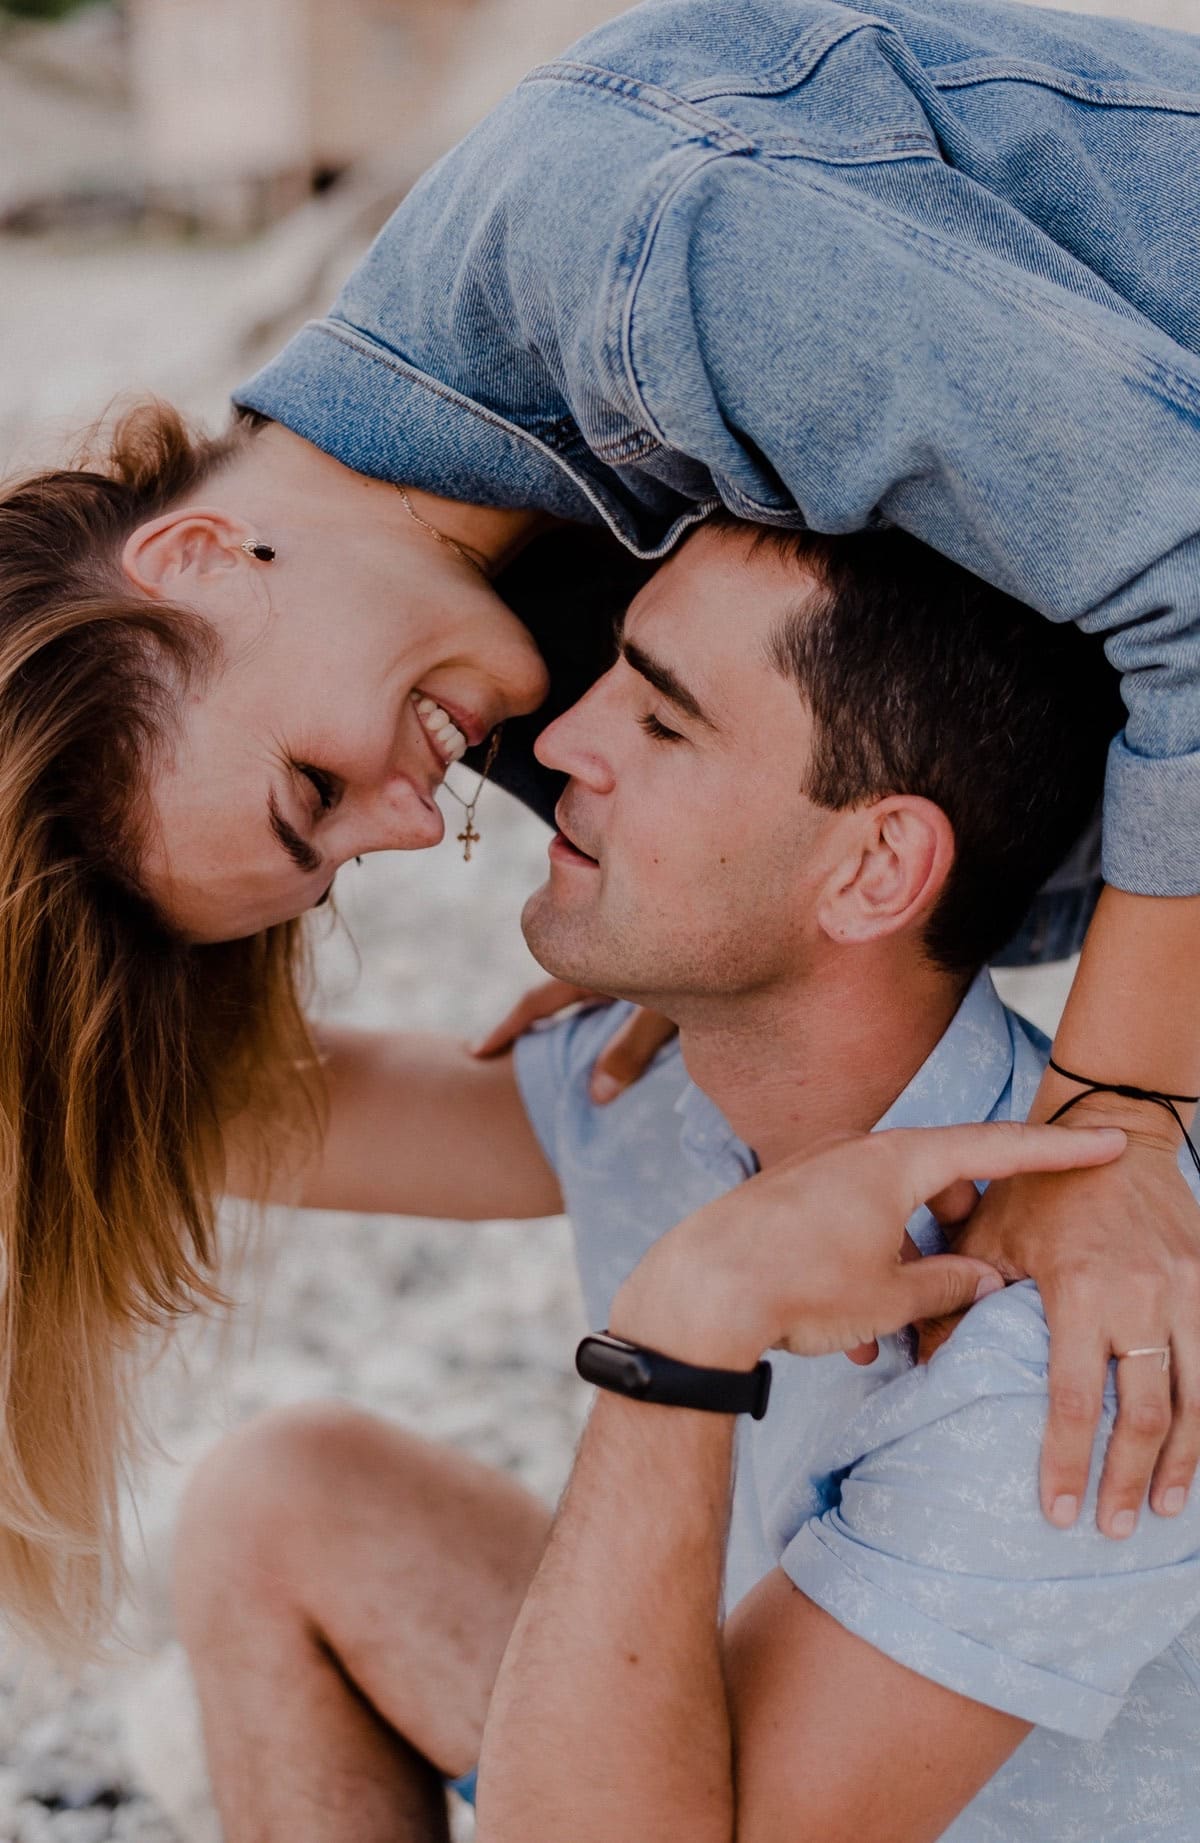 Asking questions, talking, and listening to each other is the best way to keep the connection alive in your relationship. Here are 125 romantic questions for couples to get to know and connect with your spouse.